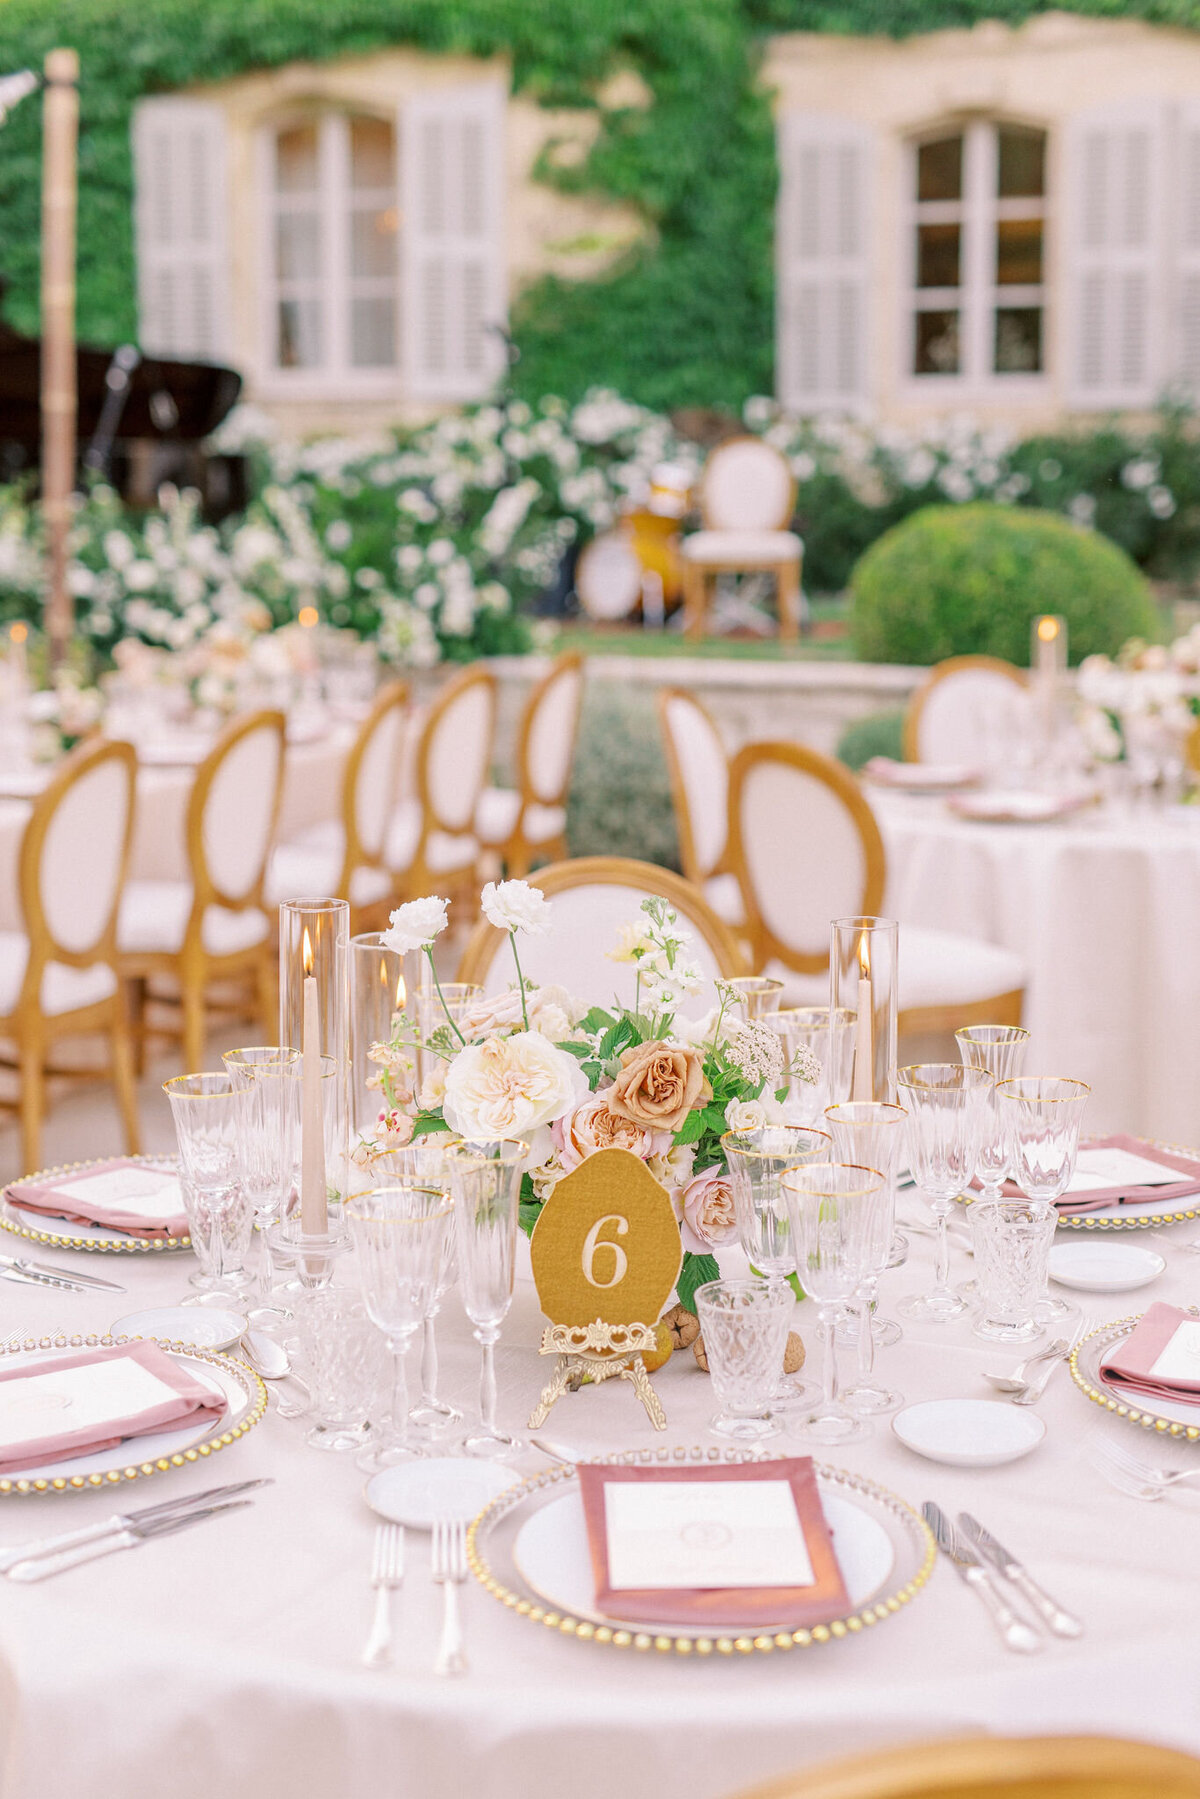 Jennifer Fox Weddings English speaking wedding planning & design agency in France crafting refined and bespoke weddings and celebrations Provence, Paris and destination MailysFortunePhotography_Jordan&Brian_662web